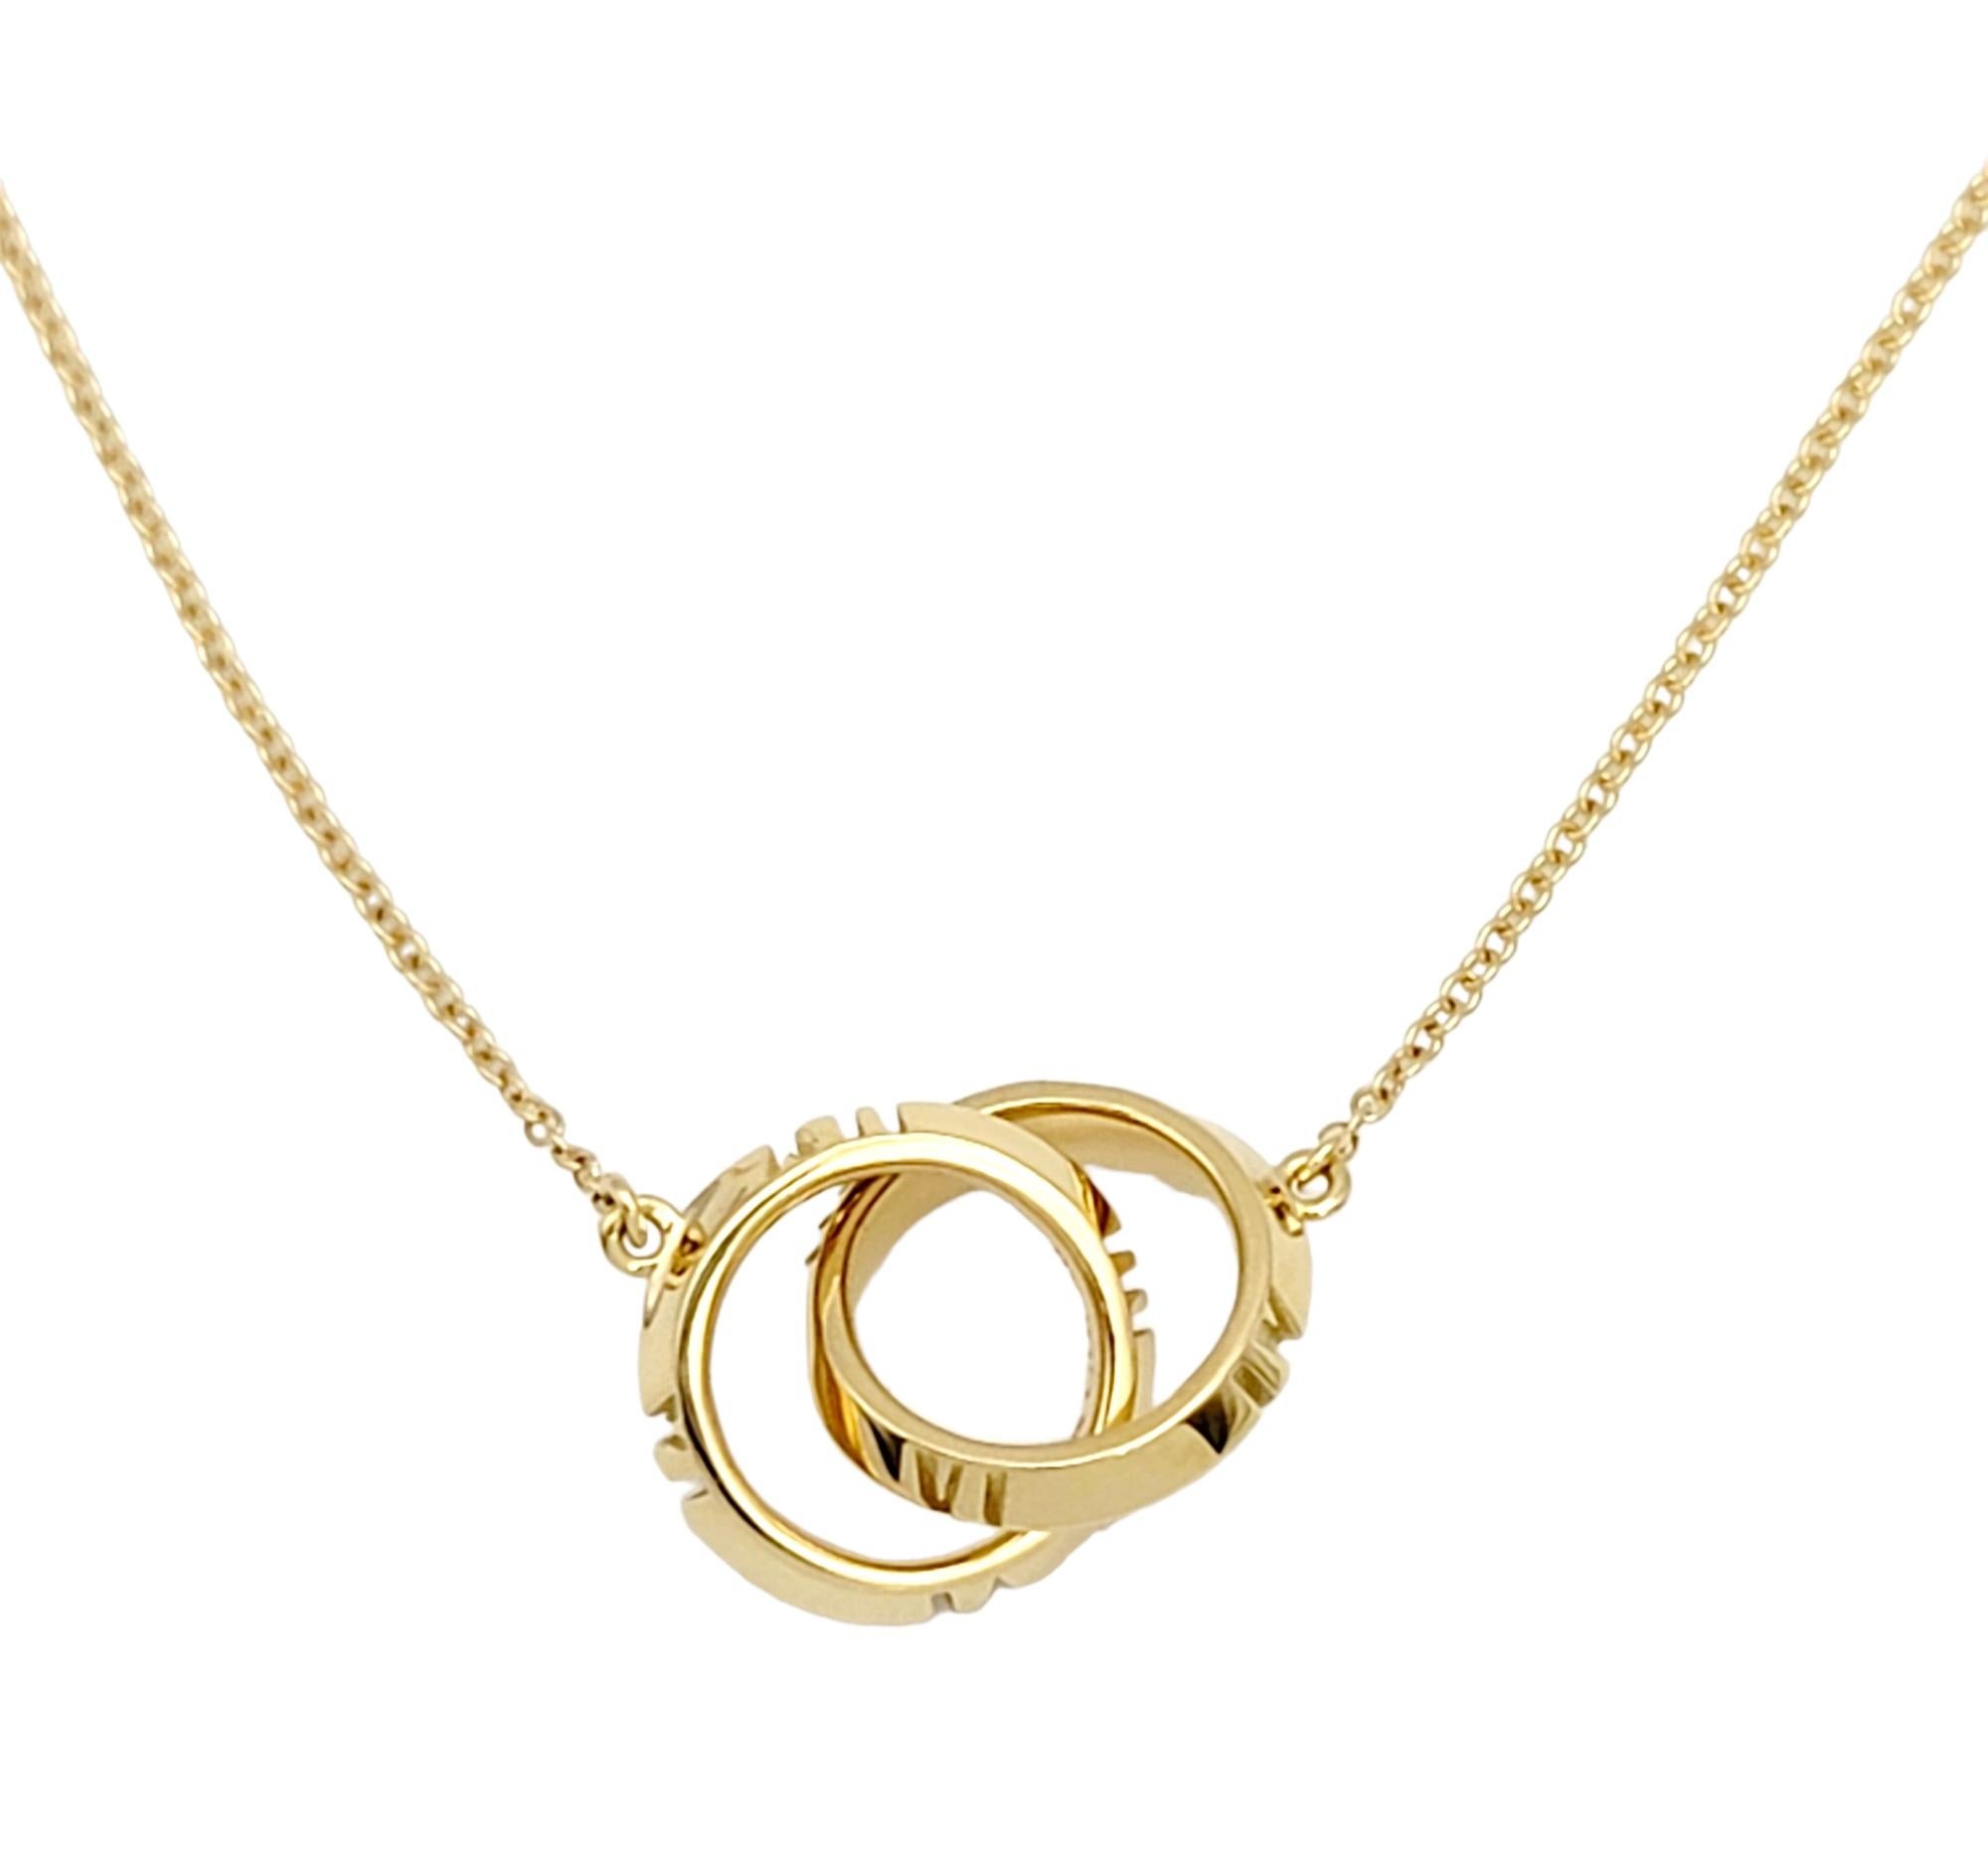 This chic pendant necklace from Tiffany & Co. is the epitome of understated elegance. Founded in 1837 in New York City, Tiffany & Co. is one of the world's most storied luxury design houses recognized globally for its innovative jewelry design,